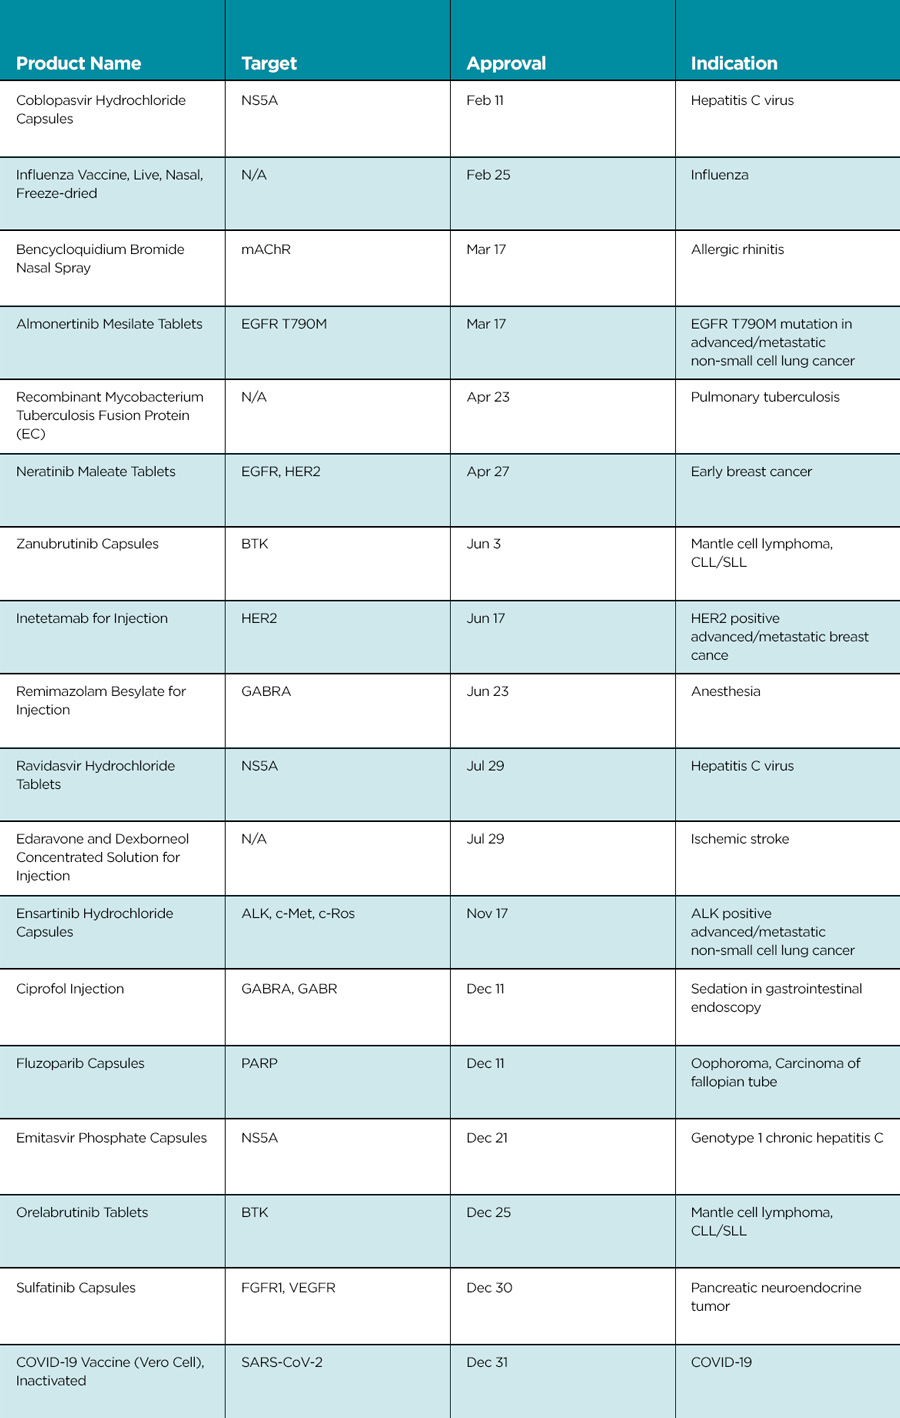 Table 1: New Drugs Approved by NMPA in 2020: Domestic Companies (China)